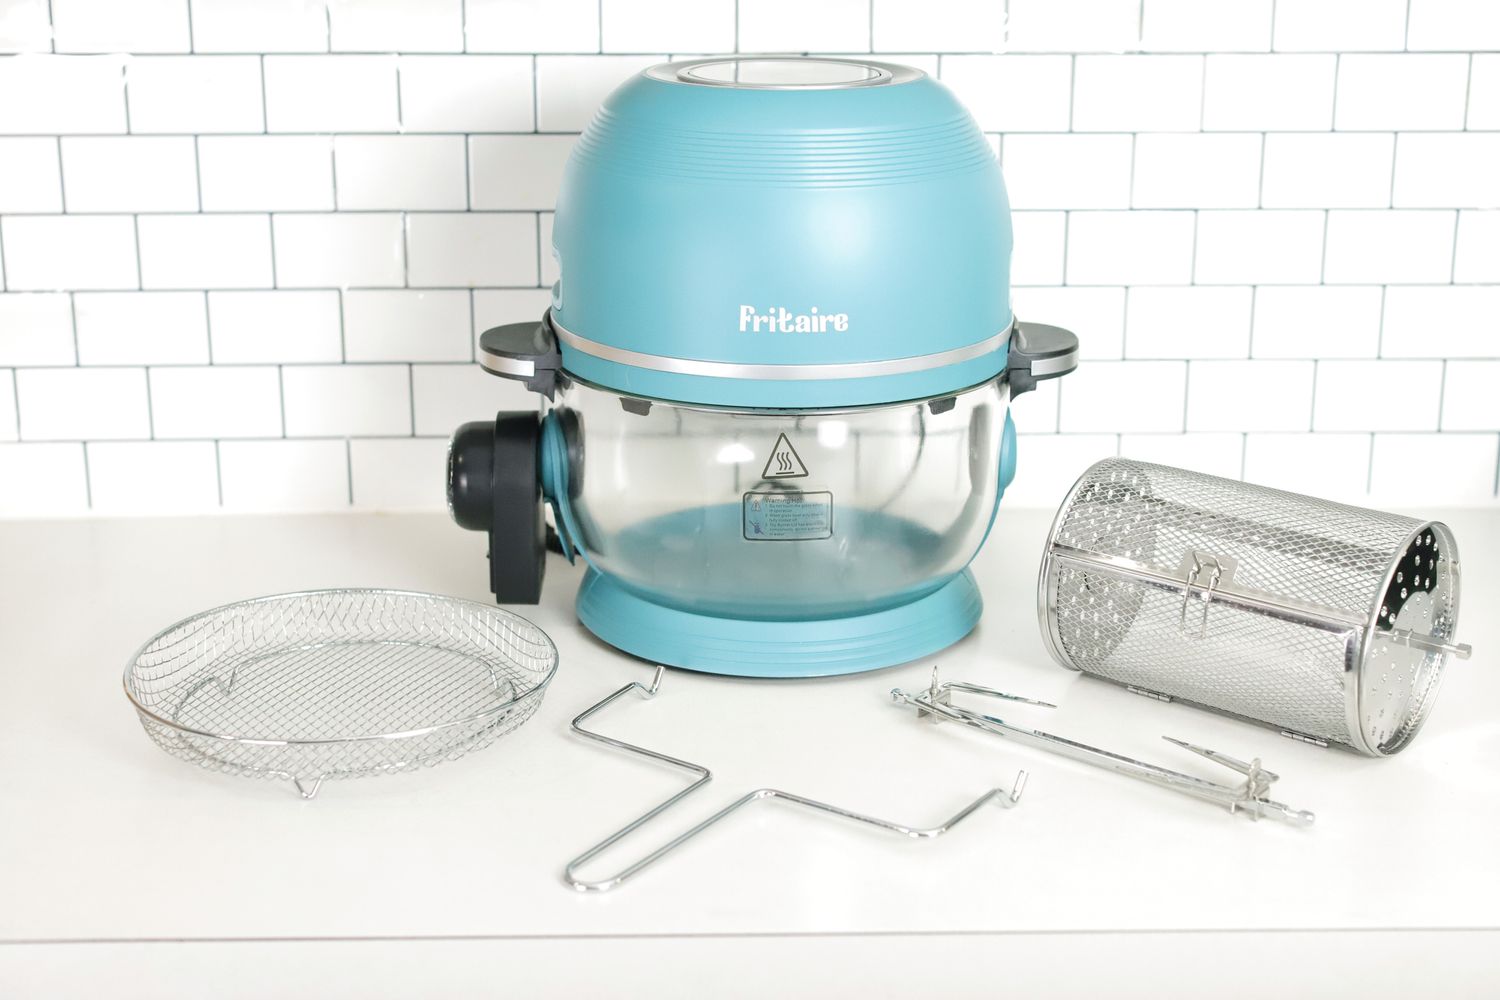 Fritaire Air Fryer and accessories displayed on a white countertop